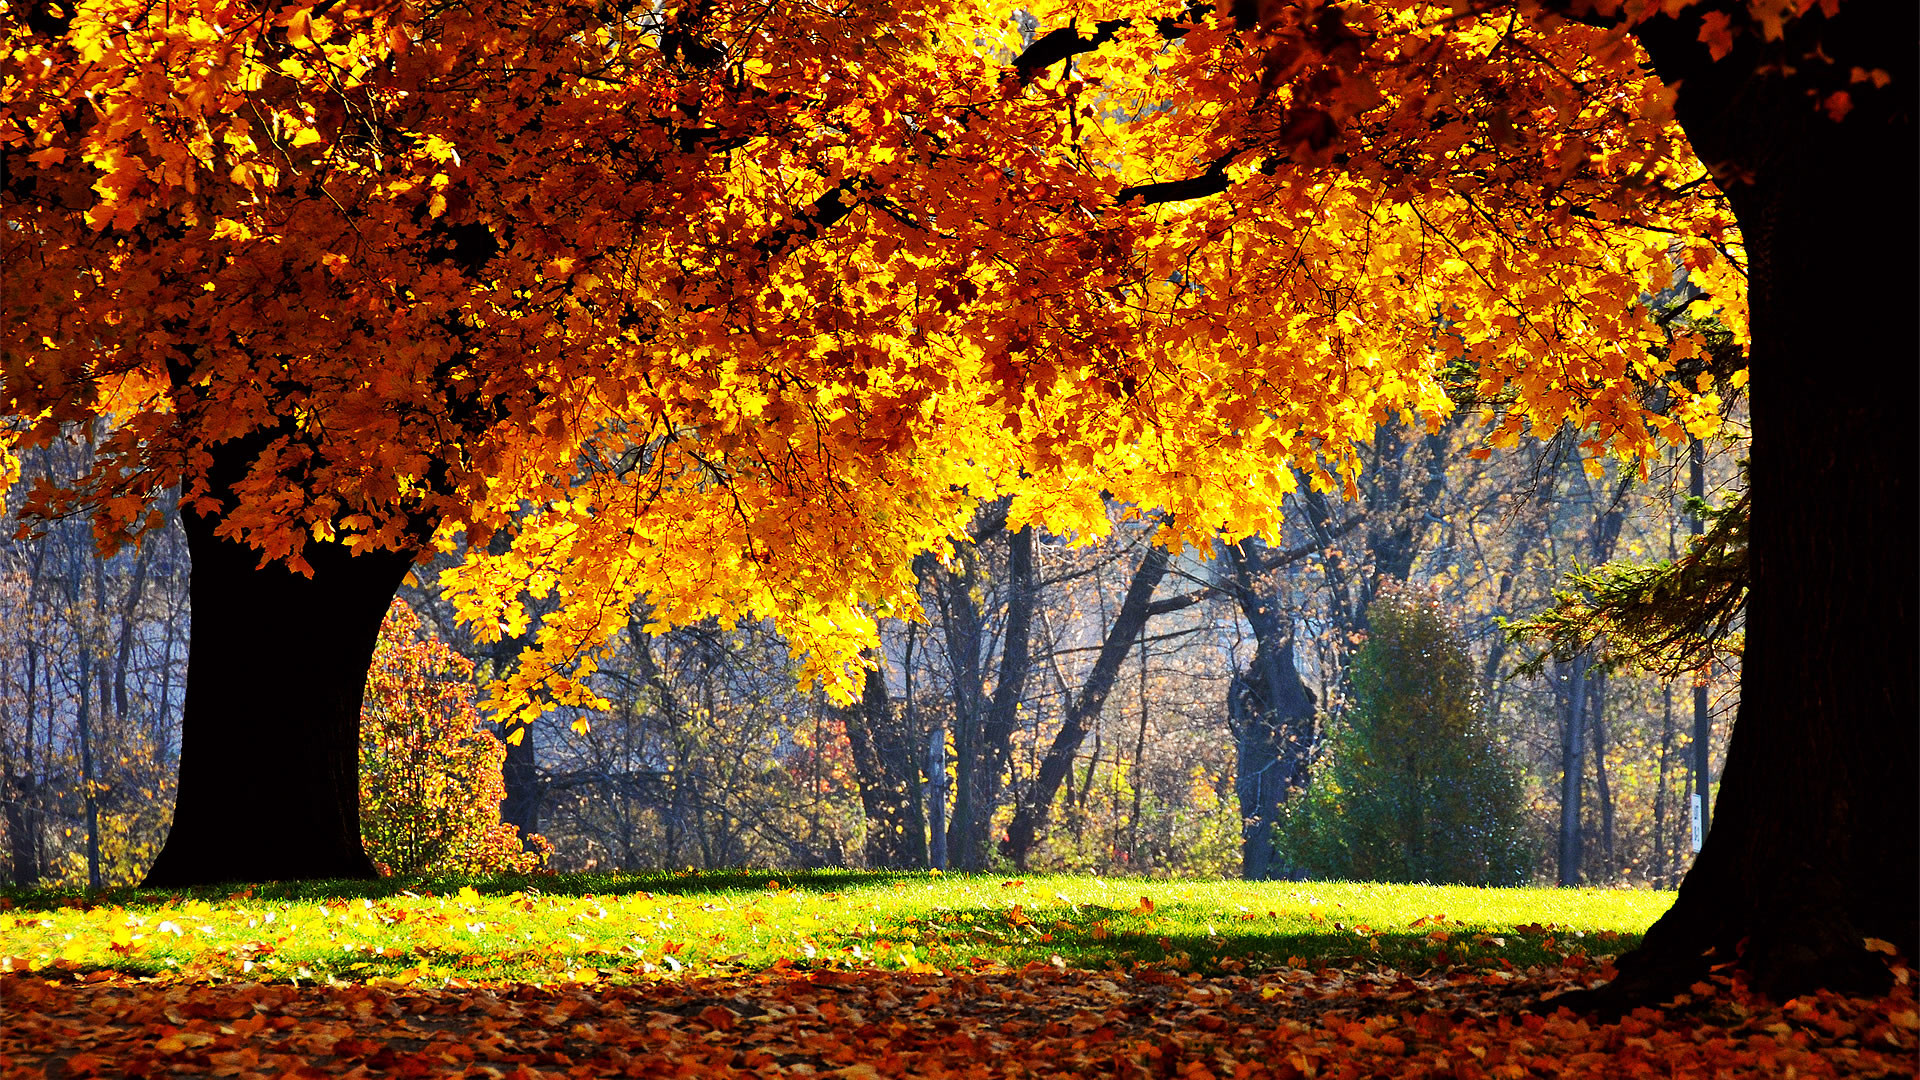 1920x1080 Nature's Seasons images Autumn Season HD wallpaper and background photos